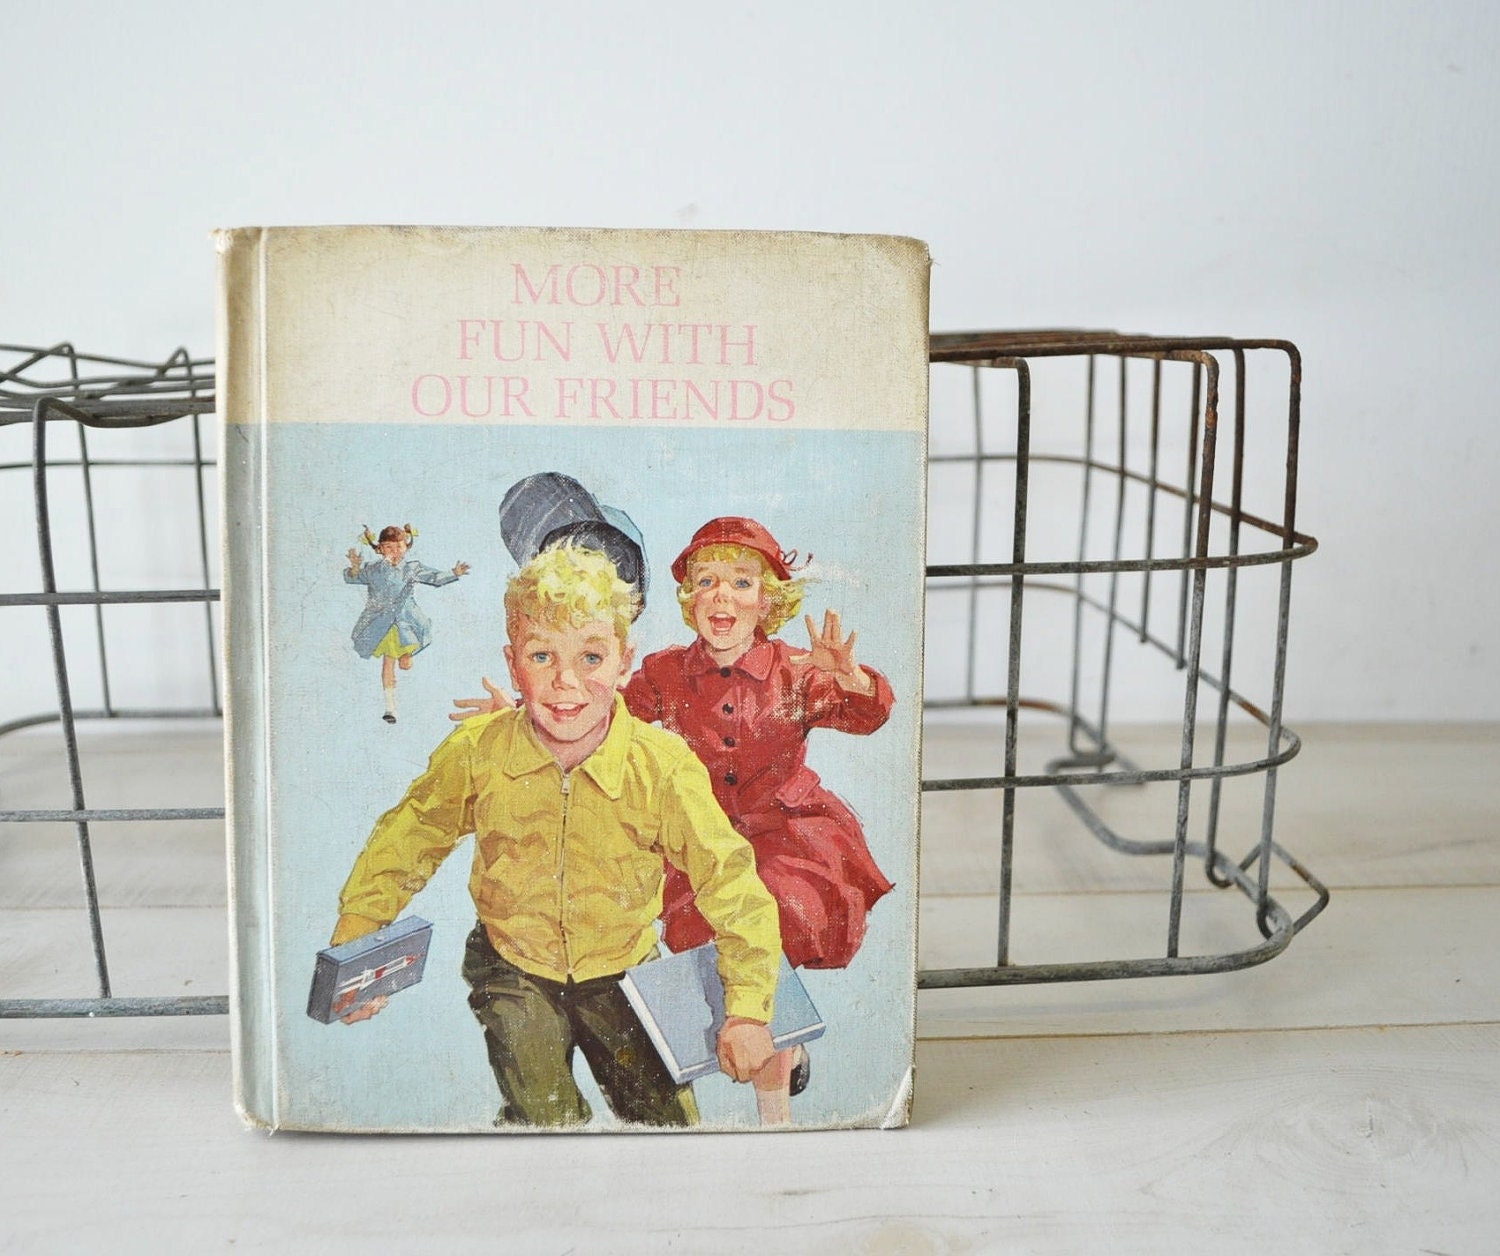 More Fun with Our Friends - Dick and Jane First grade Basic Reader Book --dick, jane, spot vintage textbook - MyraMelinda